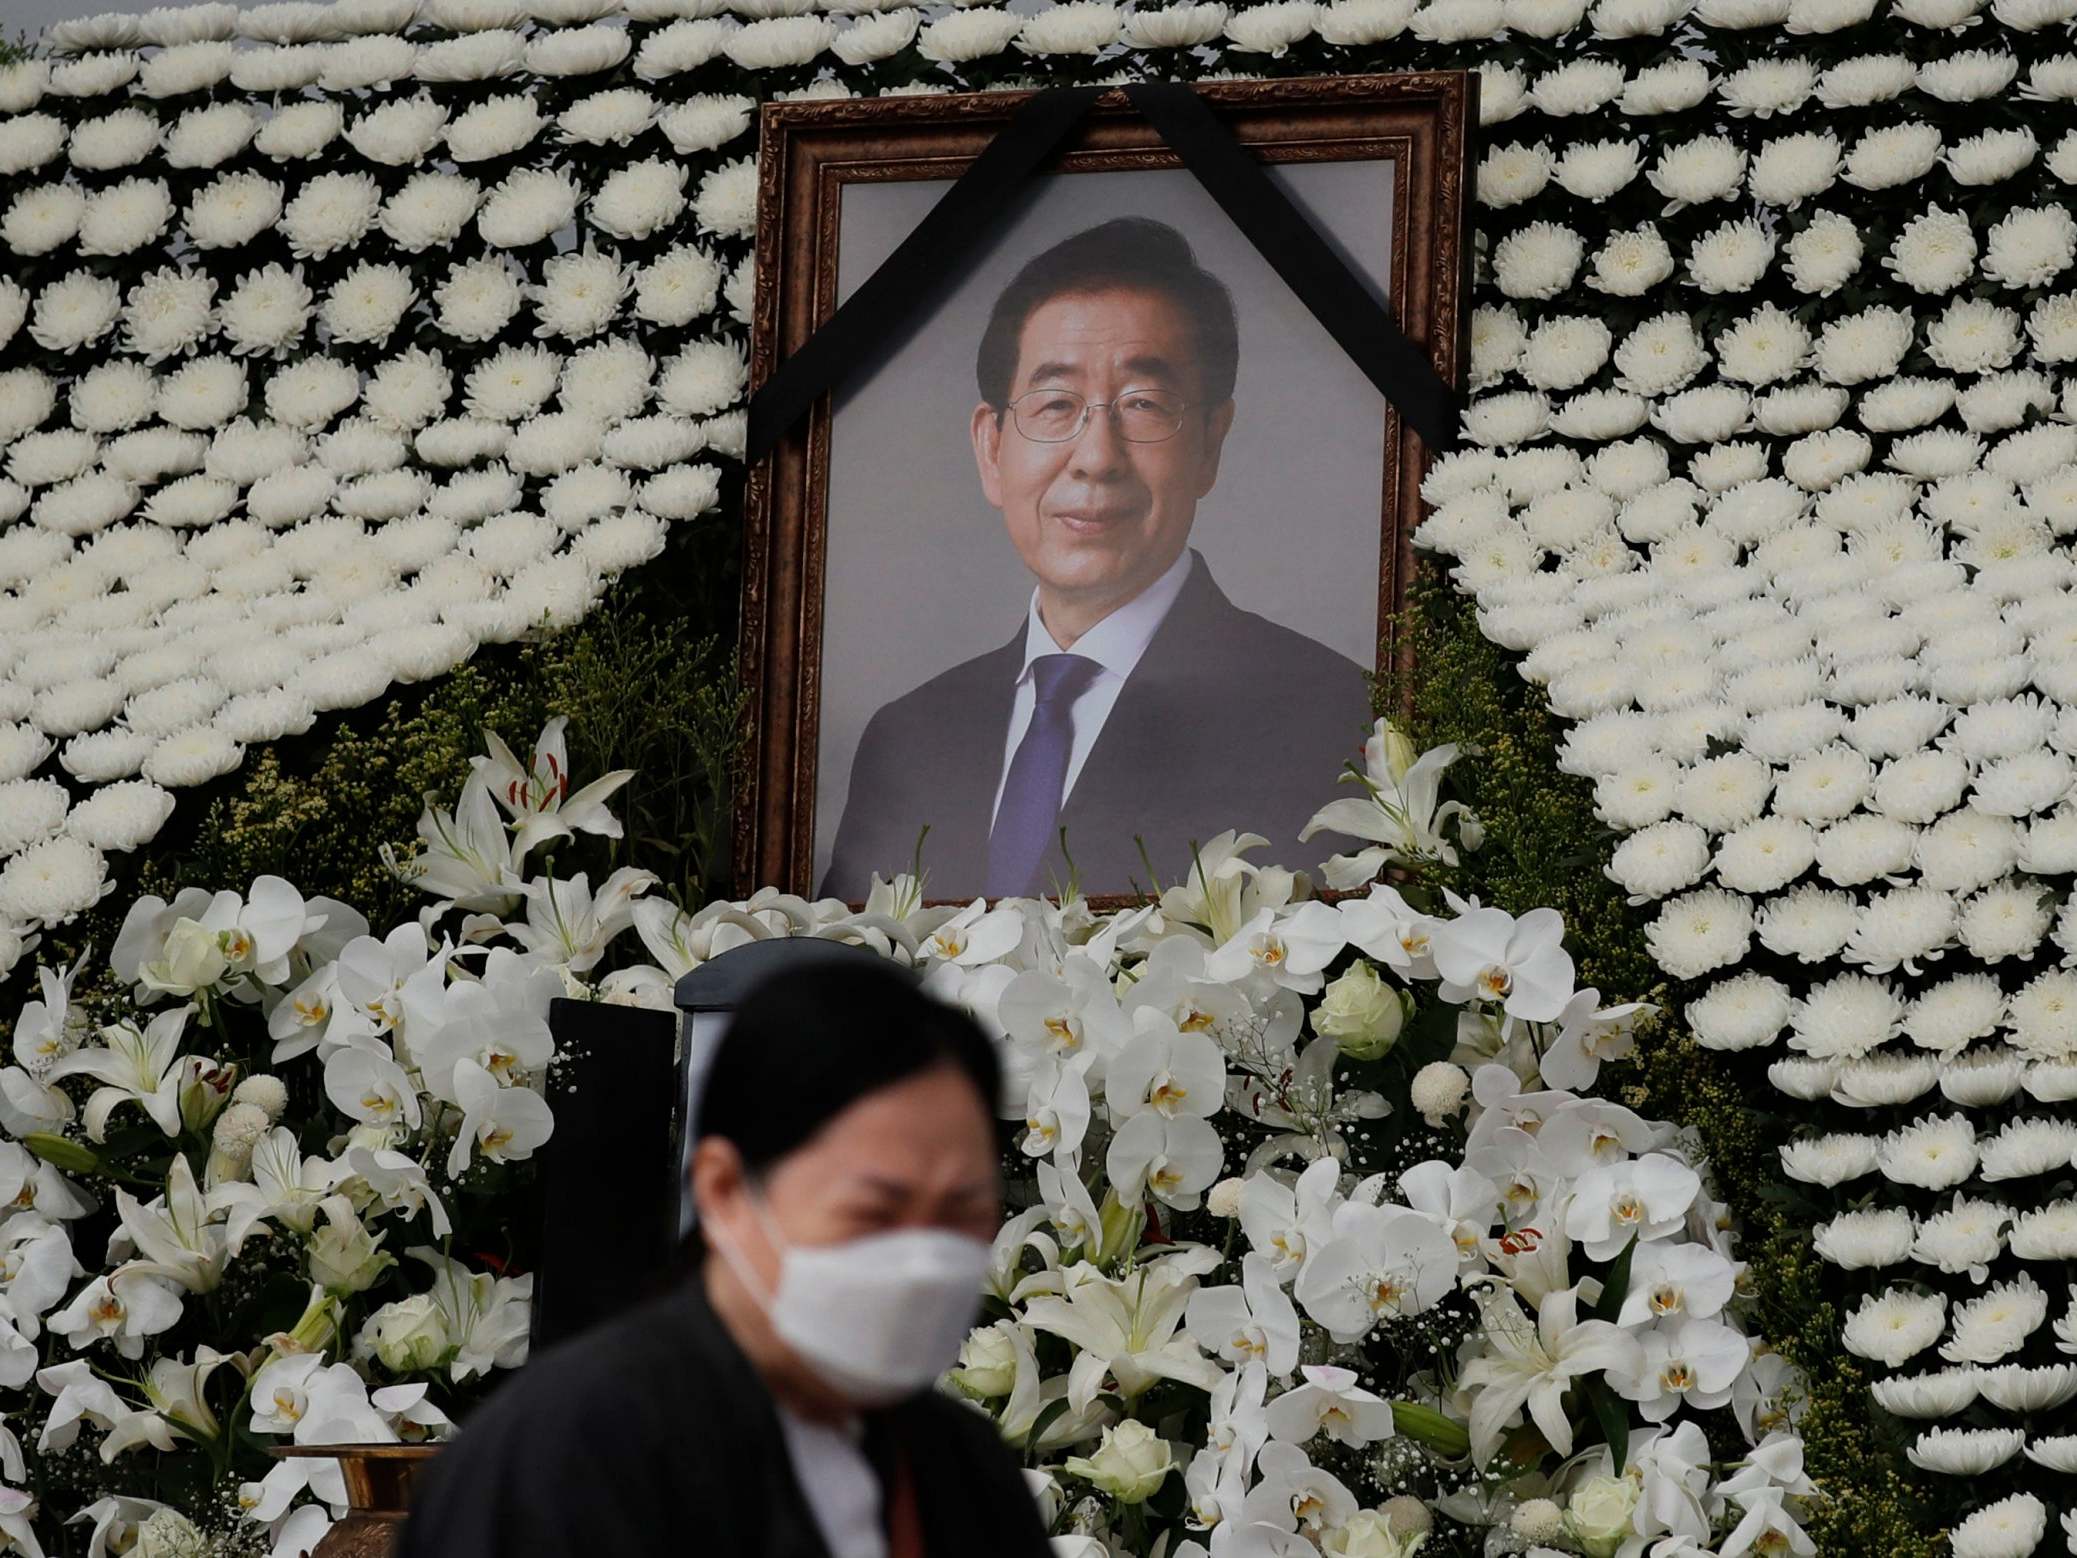 A mourner walks by a memorial altar for late Seoul Mayor Park Won-soon at City Hall Plaza in Seoul, South Korea, 13 July 2020. (Lee Jin-man/AP)